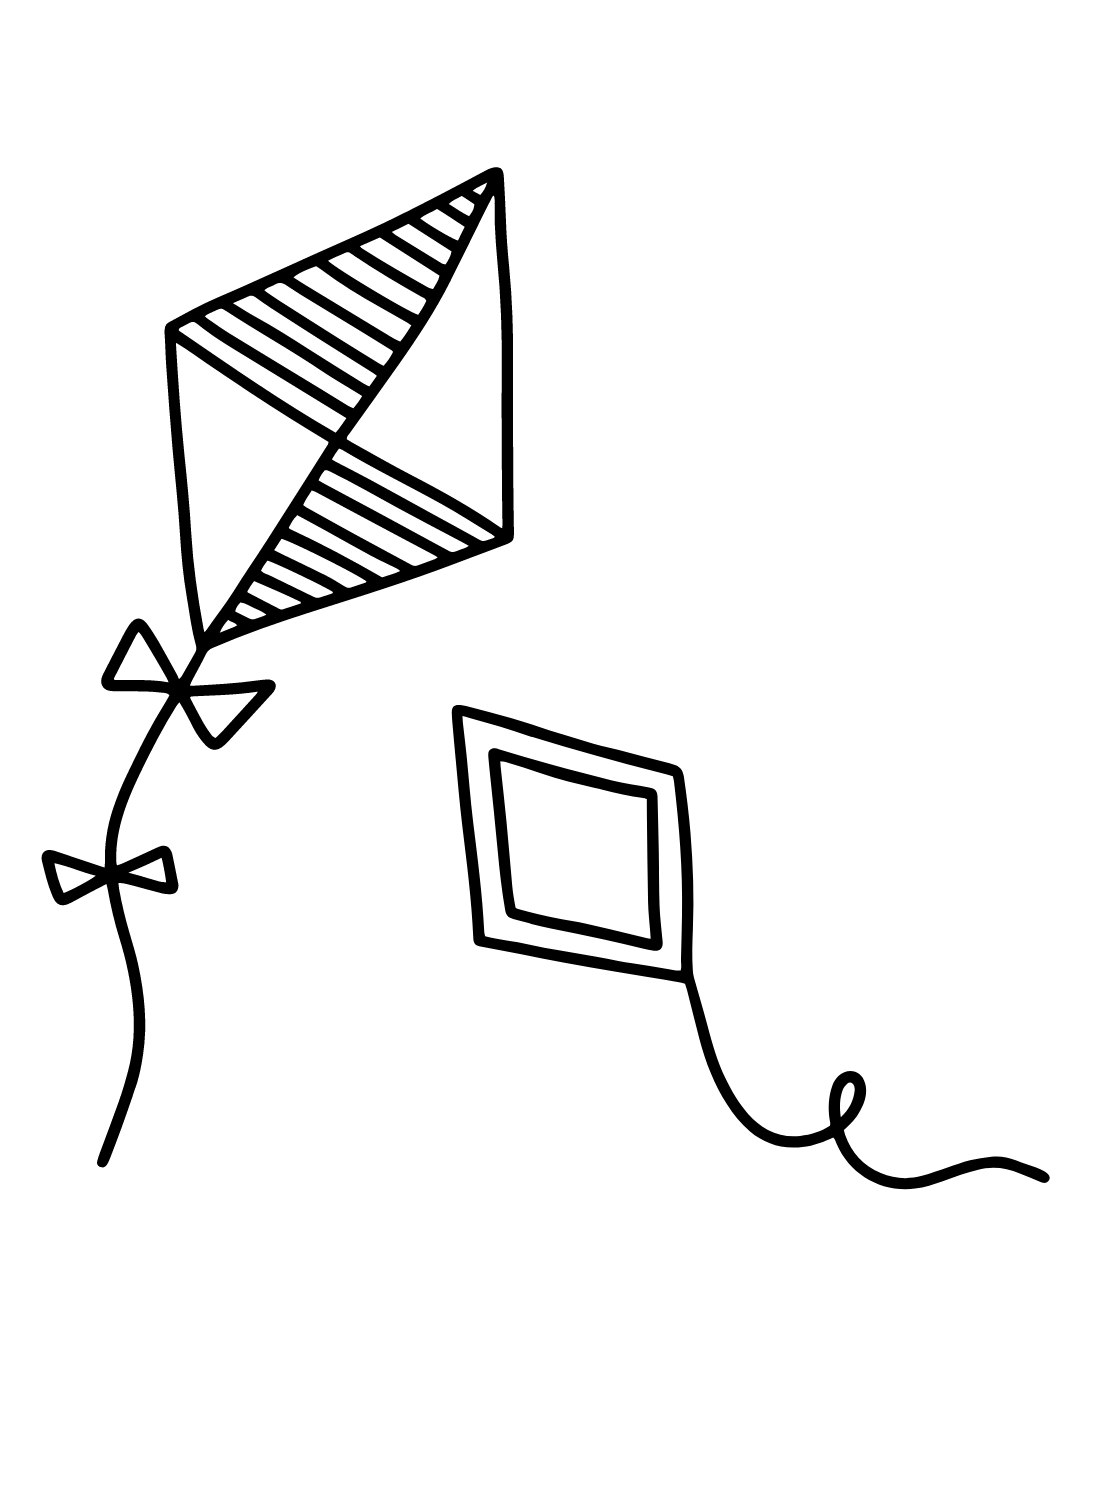 How to Draw a Kite  DrawingNow